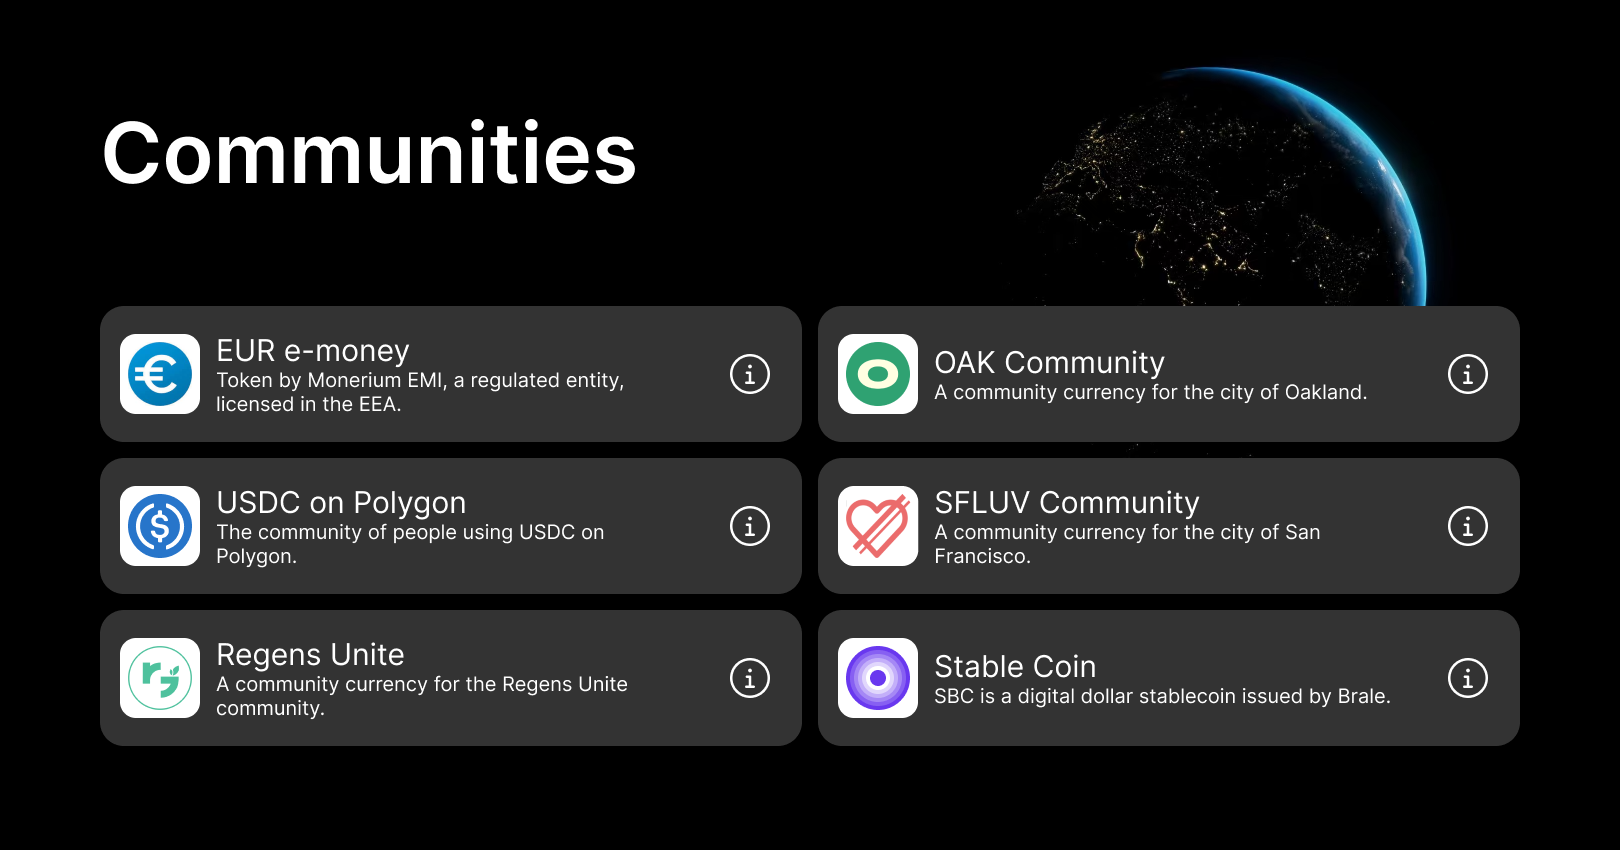 List of currently available Citizen Wallet Communities -
Brale